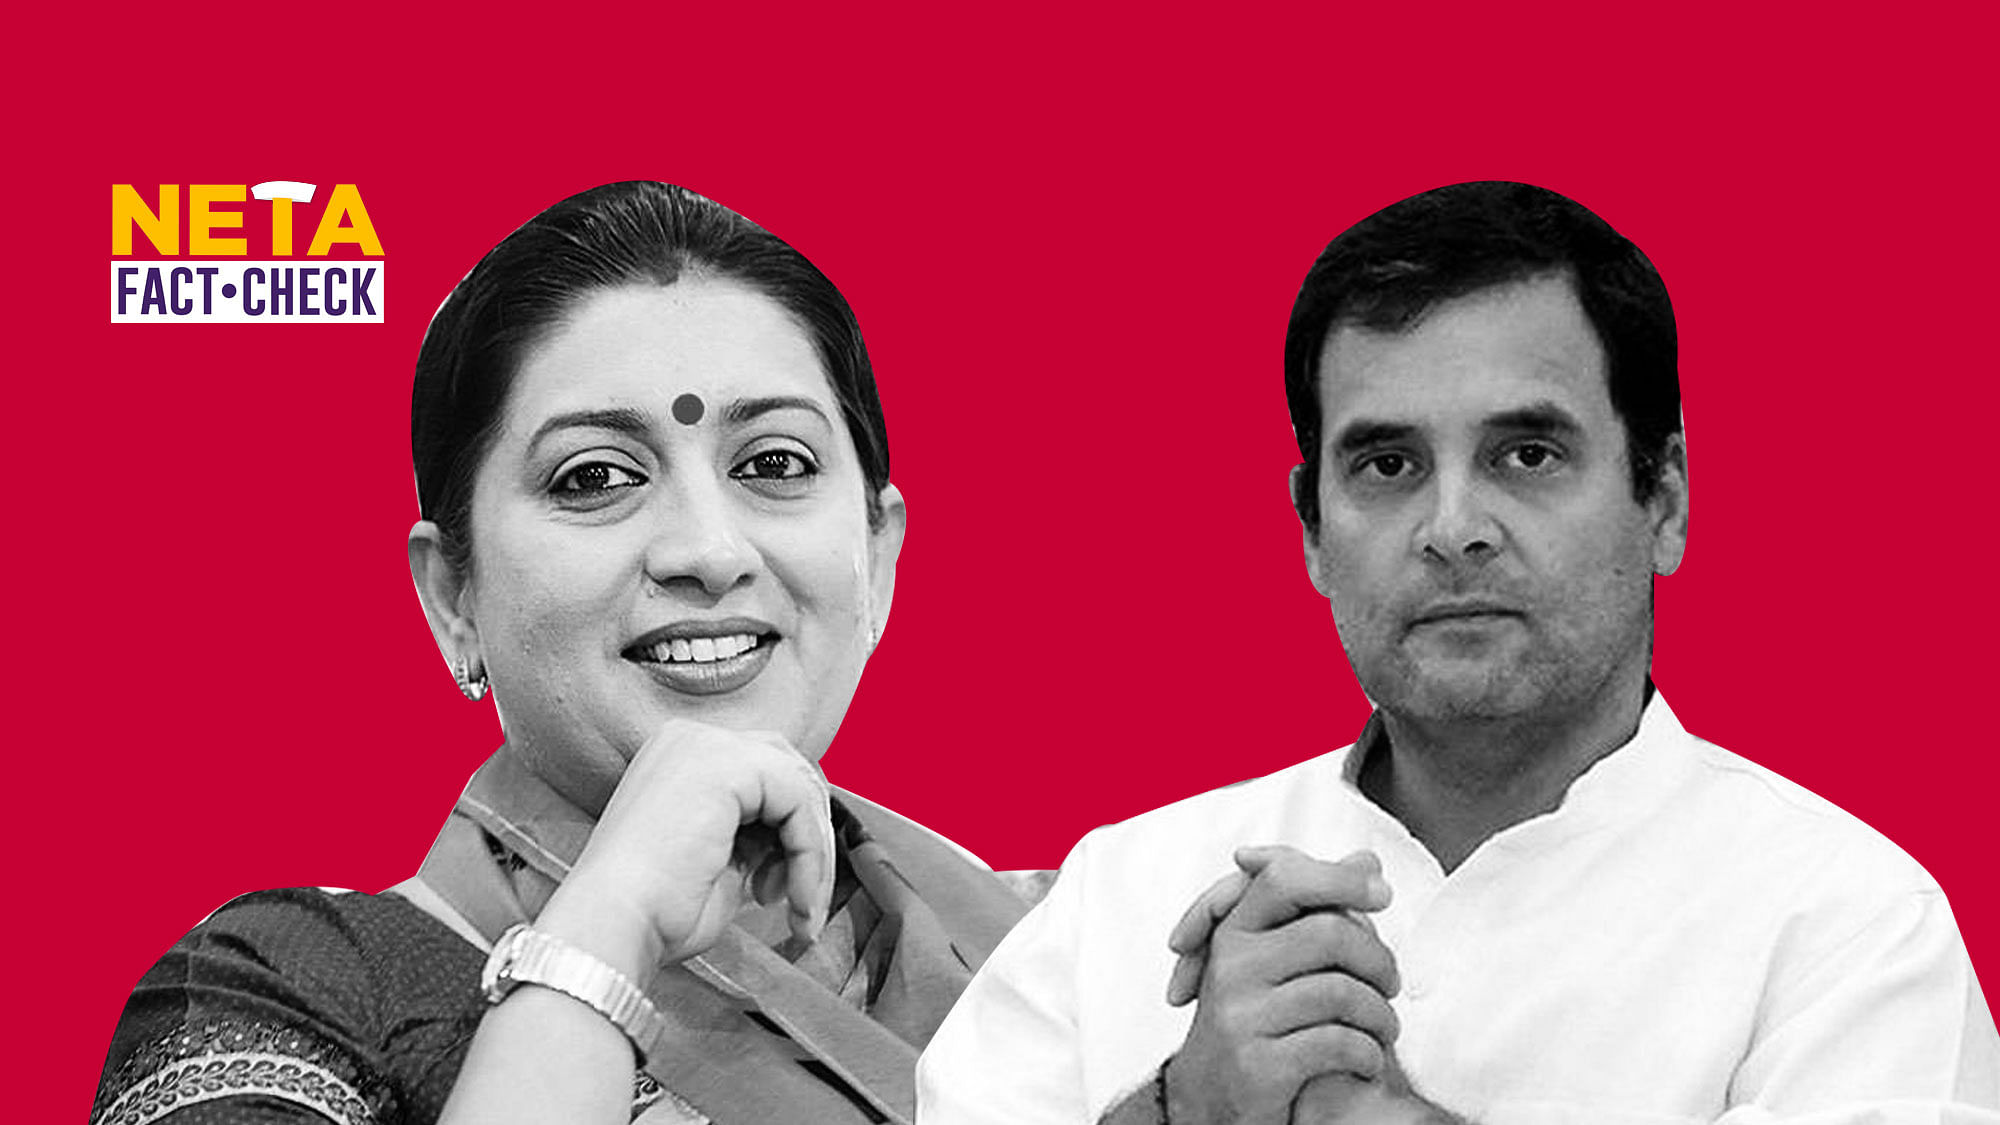 Smriti Irani launched a blistering attack on Rahul Gandhi for his “Rape in India” remark.